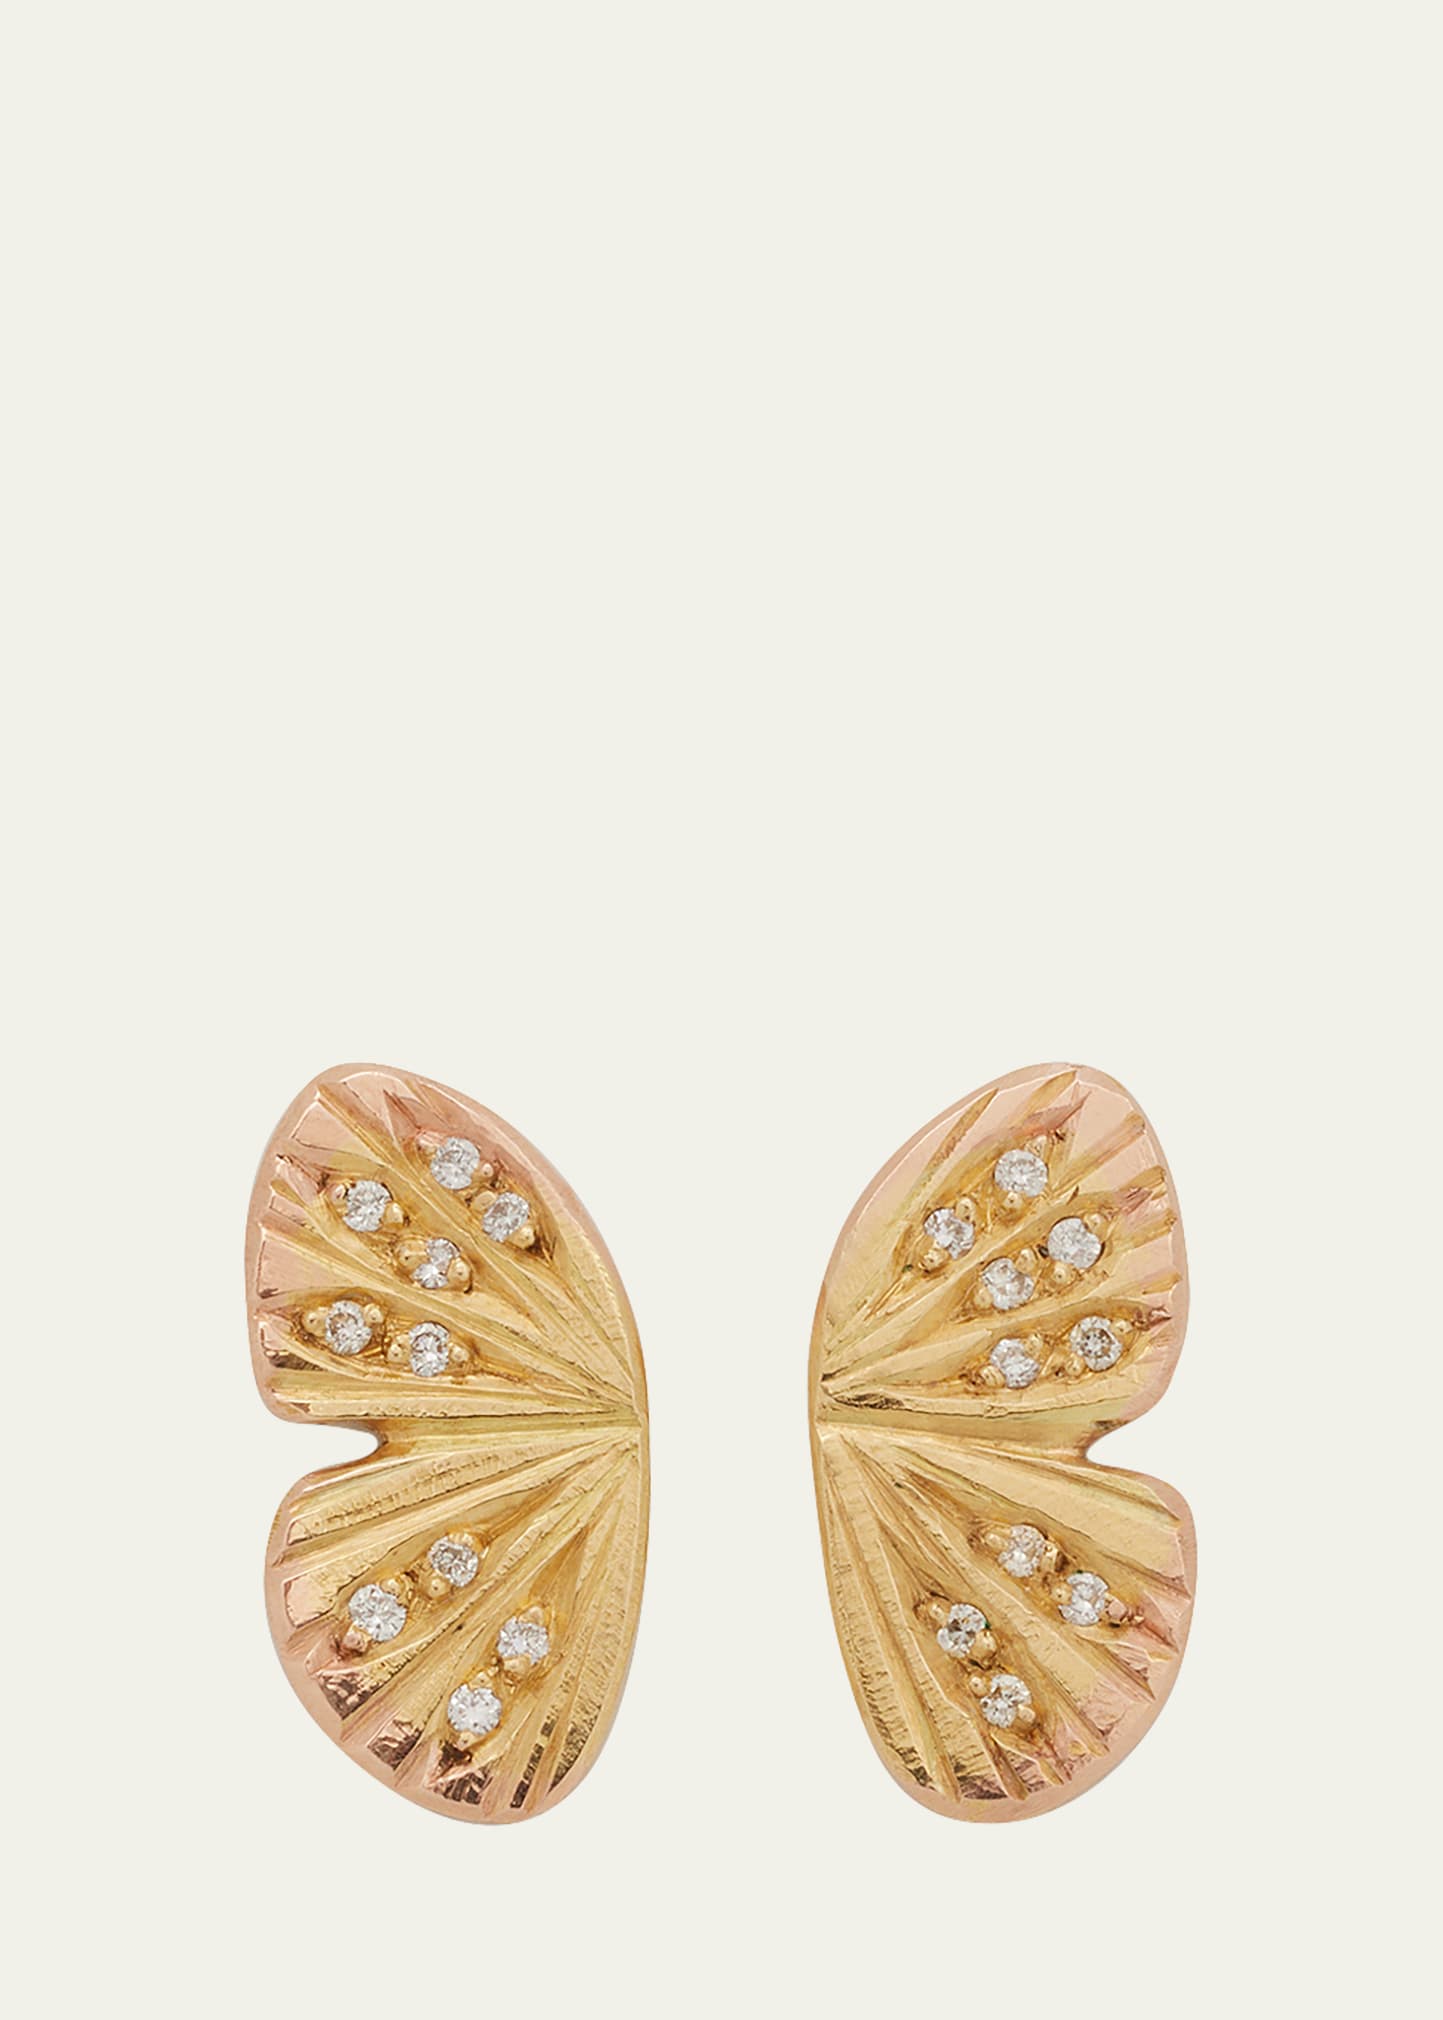 Baby Asterope Pave Stud Earrings with 18K Gold, 14K Gold and White Diamonds